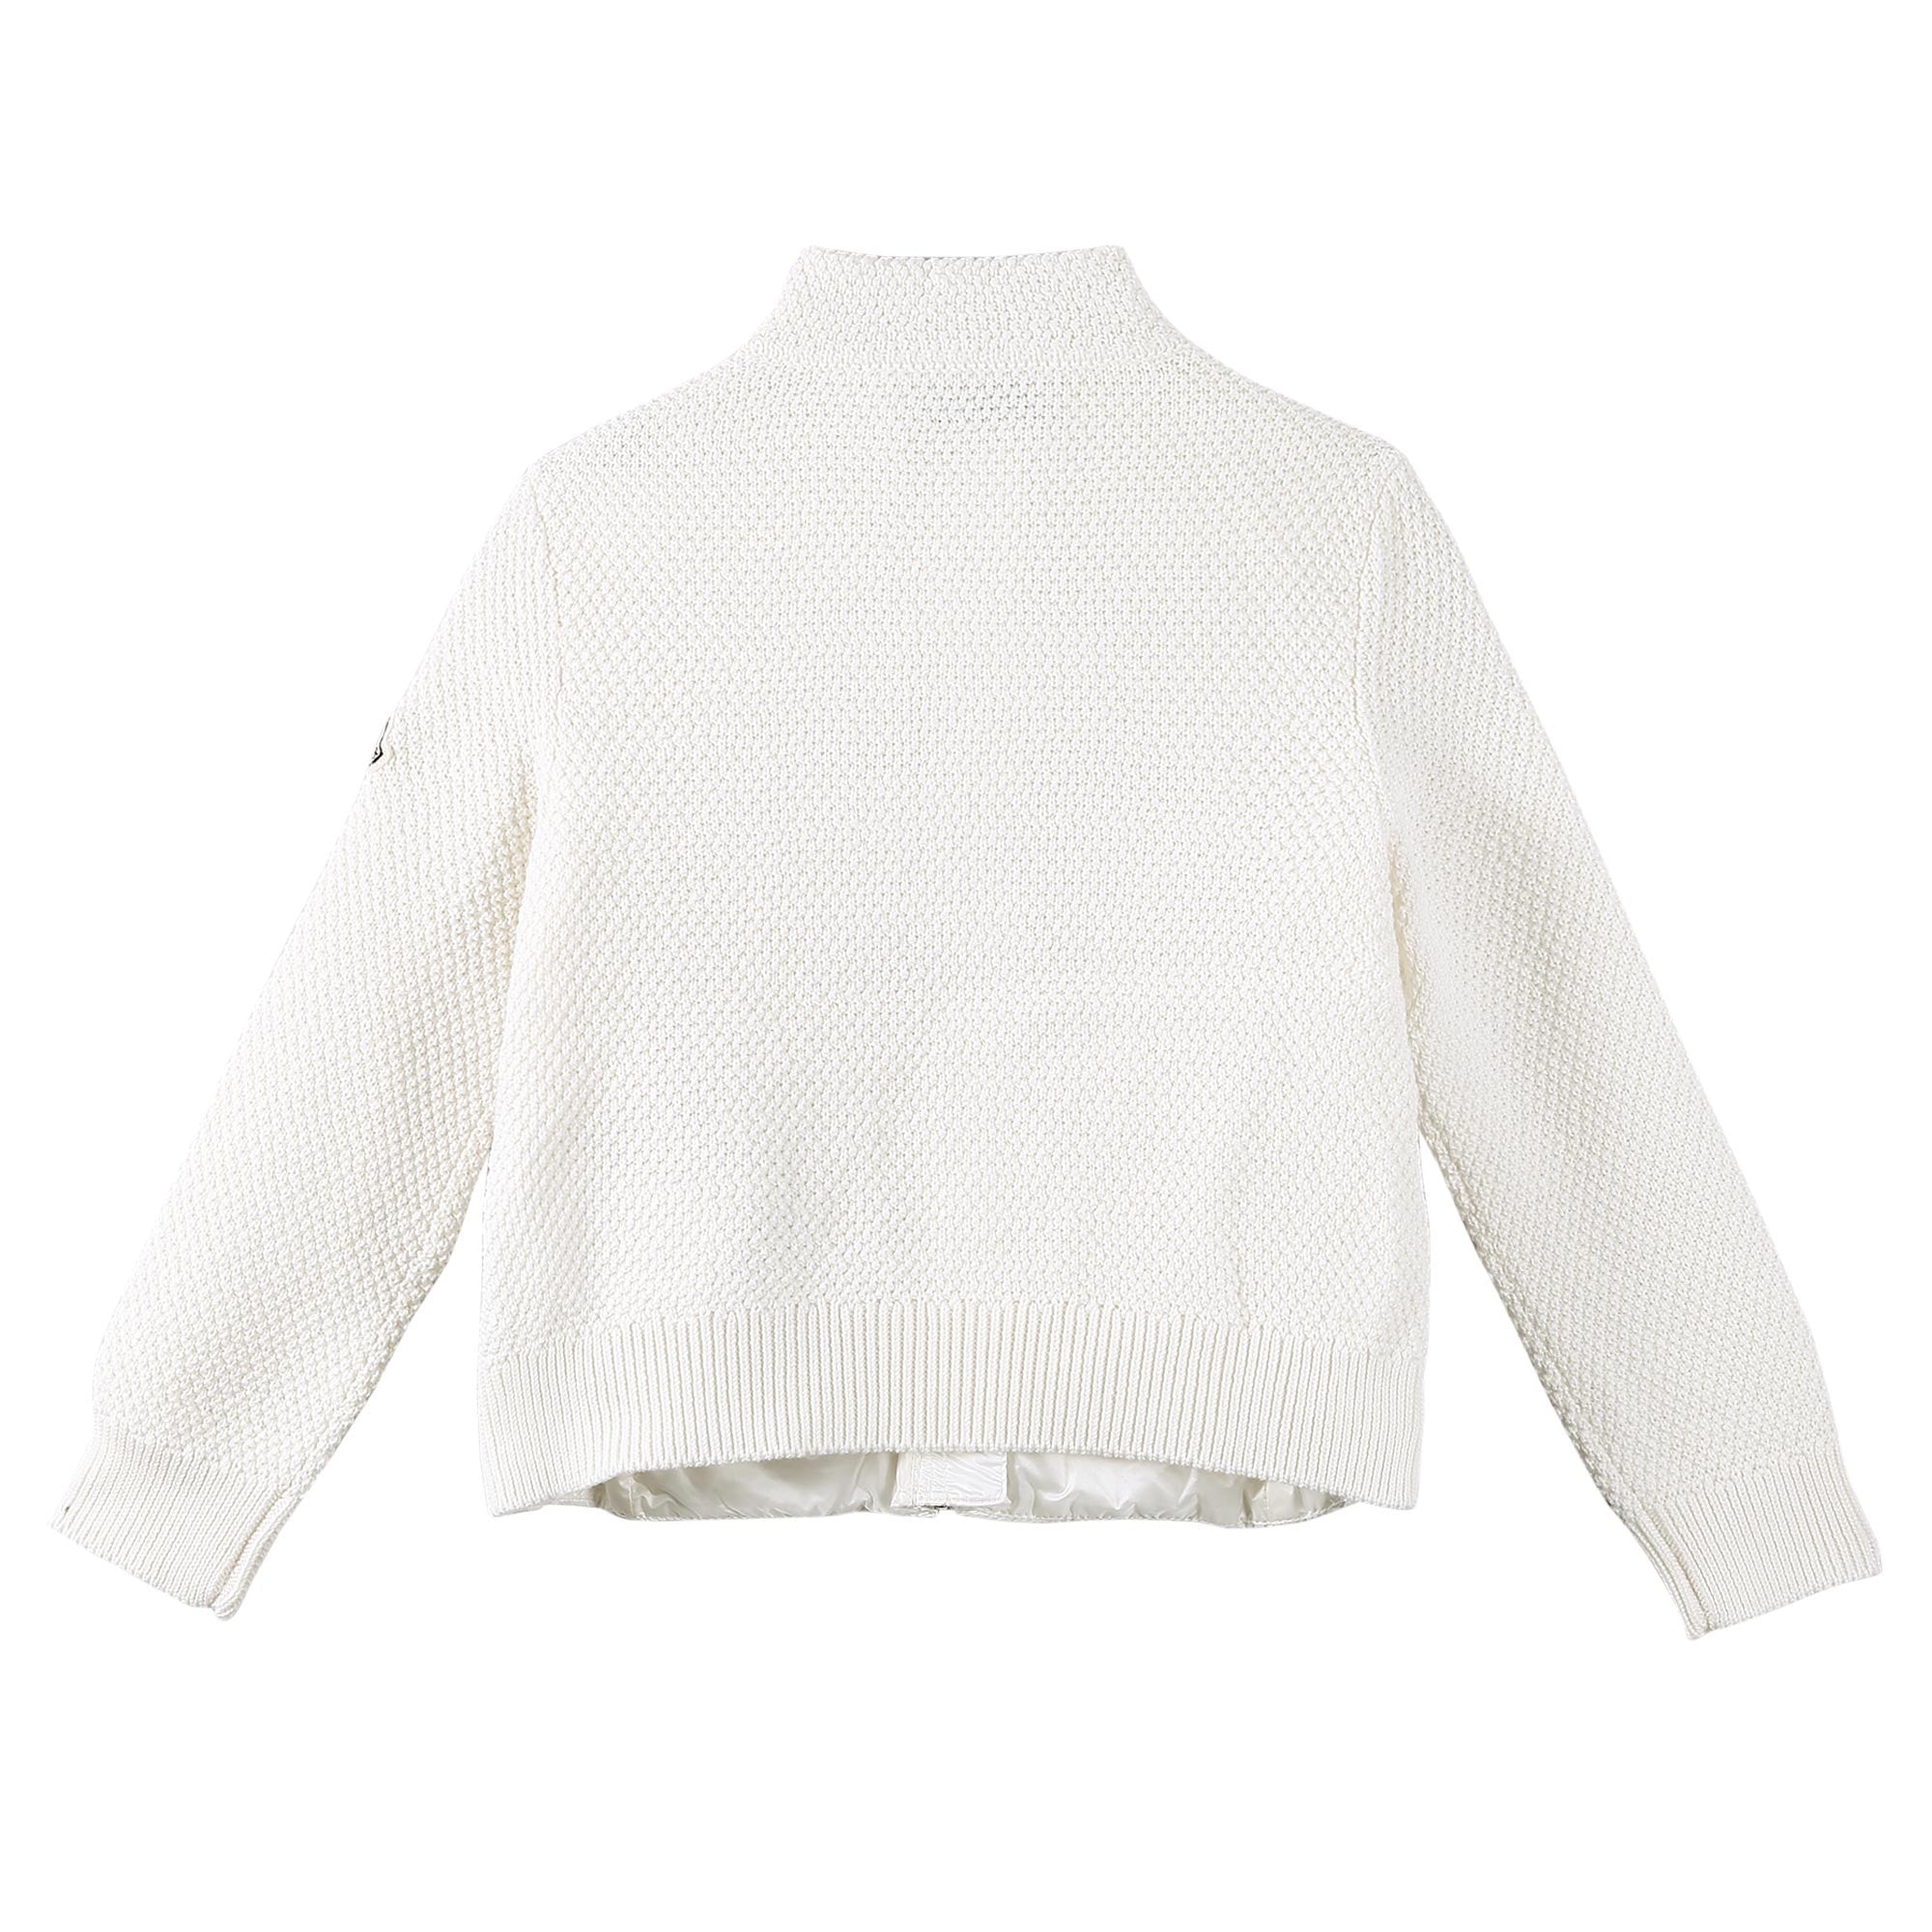 Boys White Down Padded Knitted Jackets - CÉMAROSE | Children's Fashion Store - 2